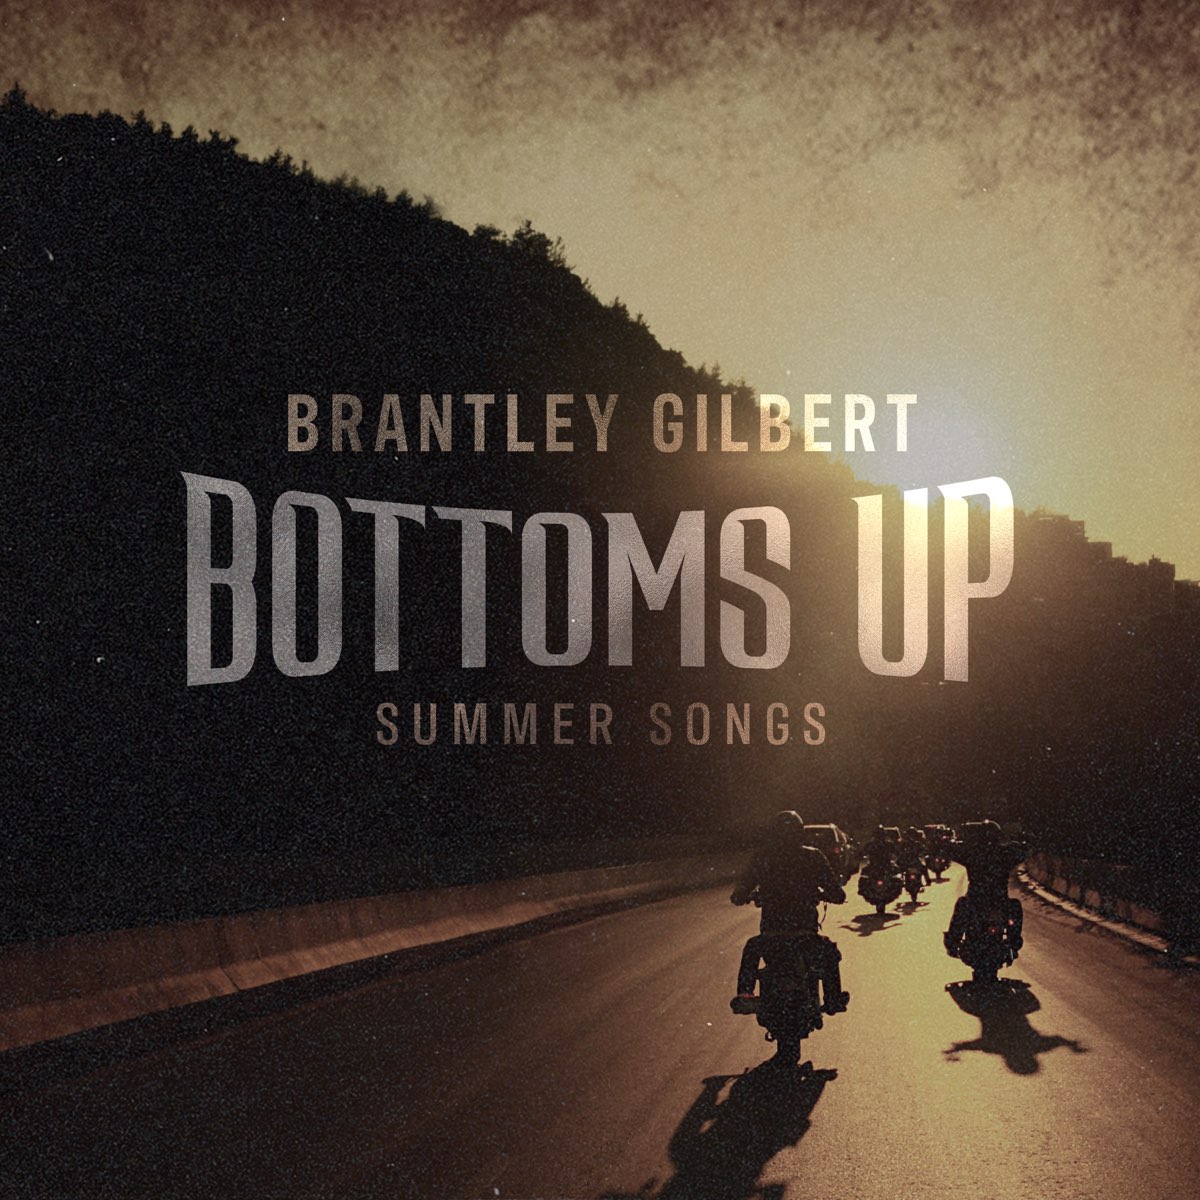 Bottoms Up: Summer Songs - EP by Brantley Gilbert on Apple Music